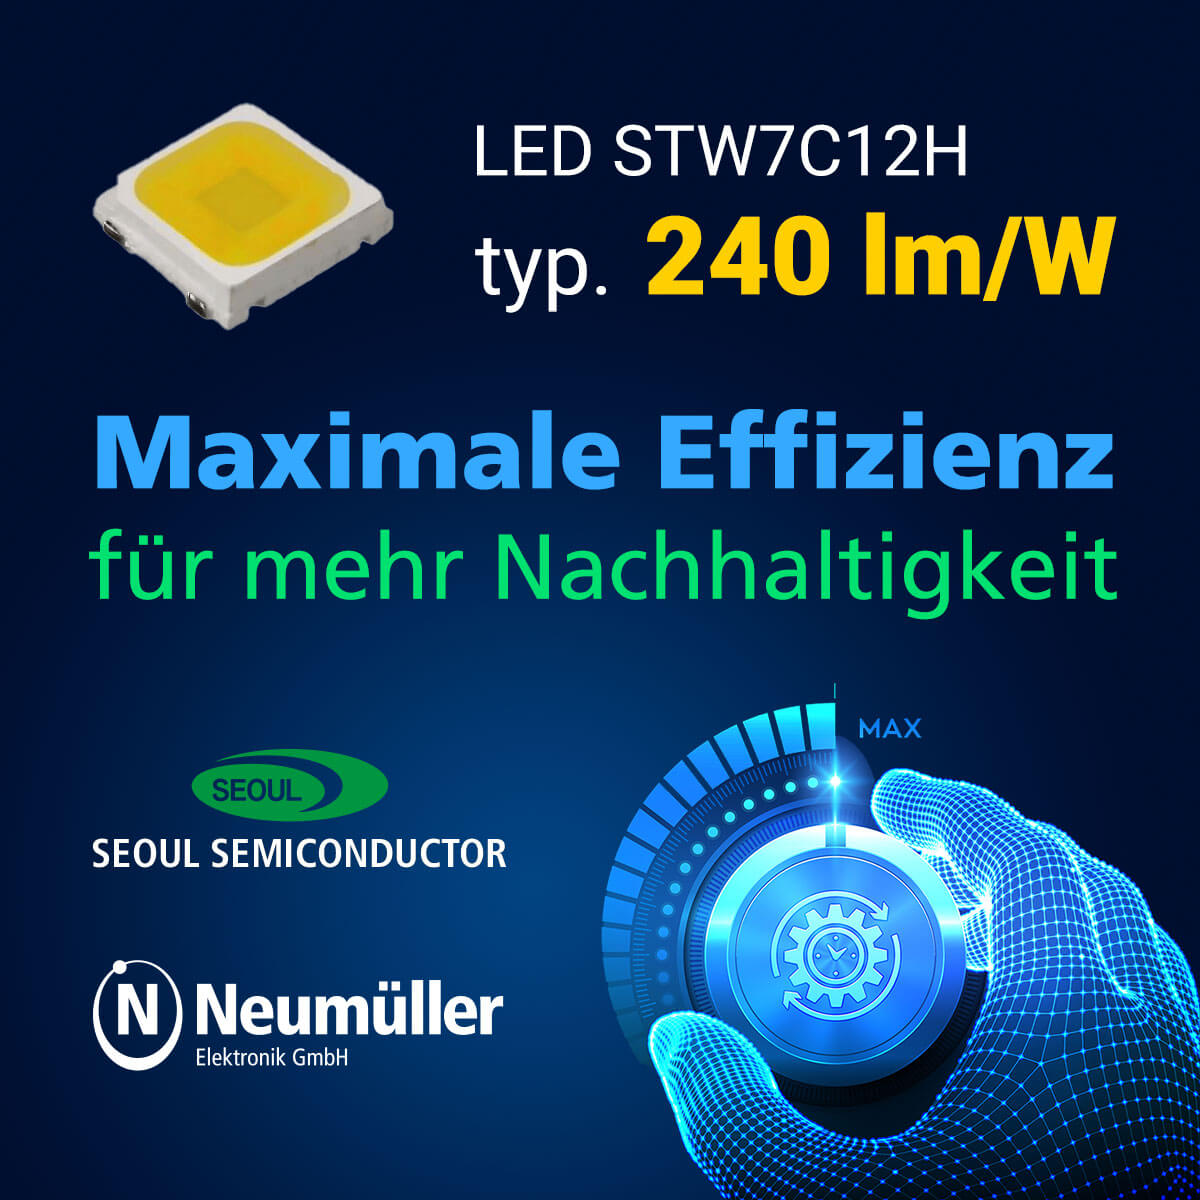 The STW7C12H by Seoul Semiconductor: Maximum Efficiency for Increased Sustainability